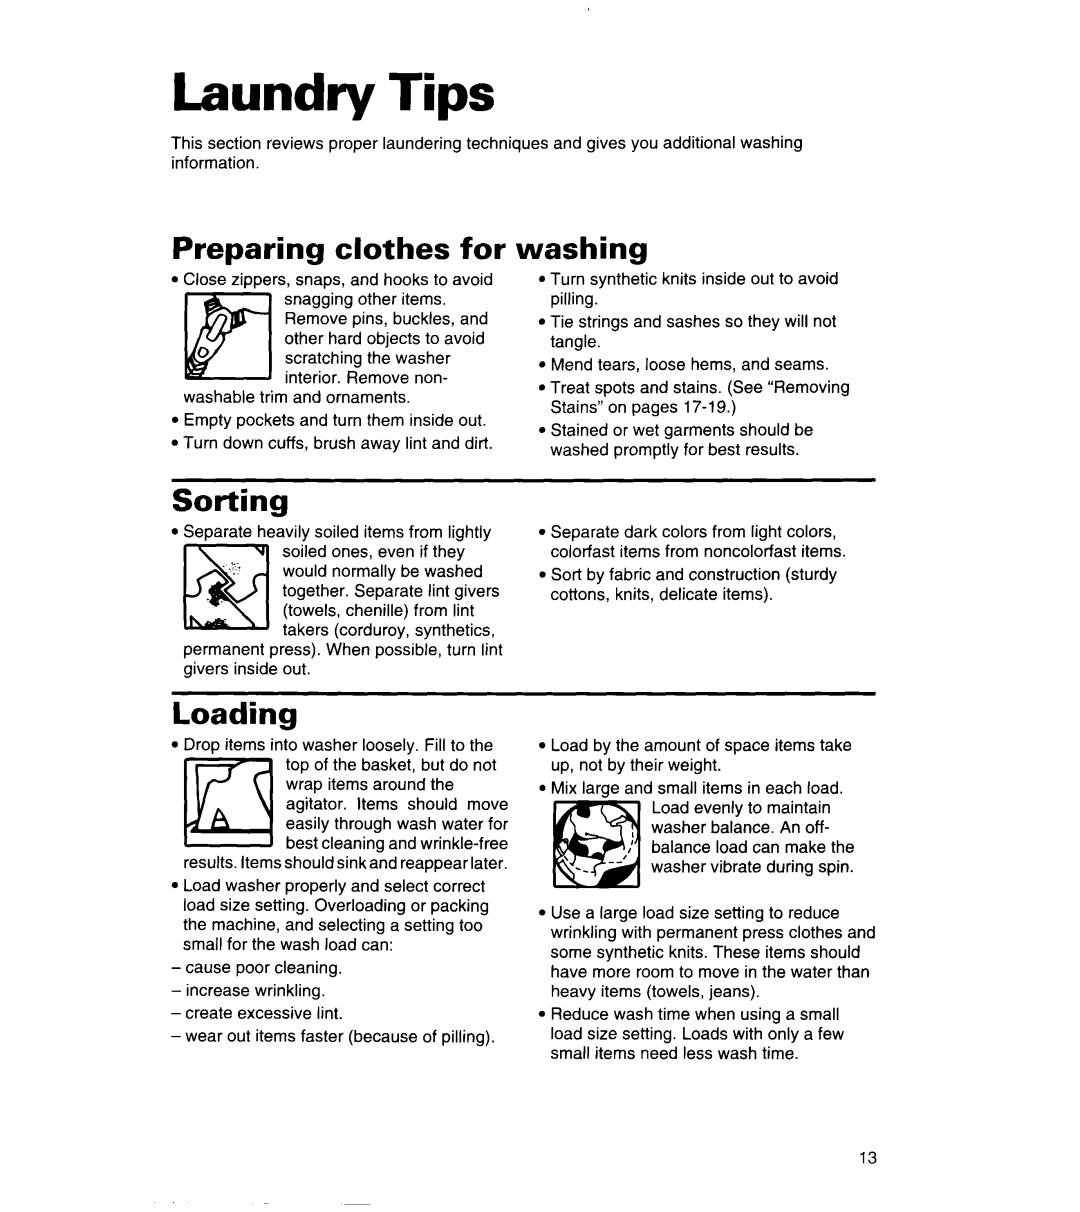 Whirlpool 3360464 warranty Laundry Tips, Preparing clothes for, washing, Sorting, Loading 